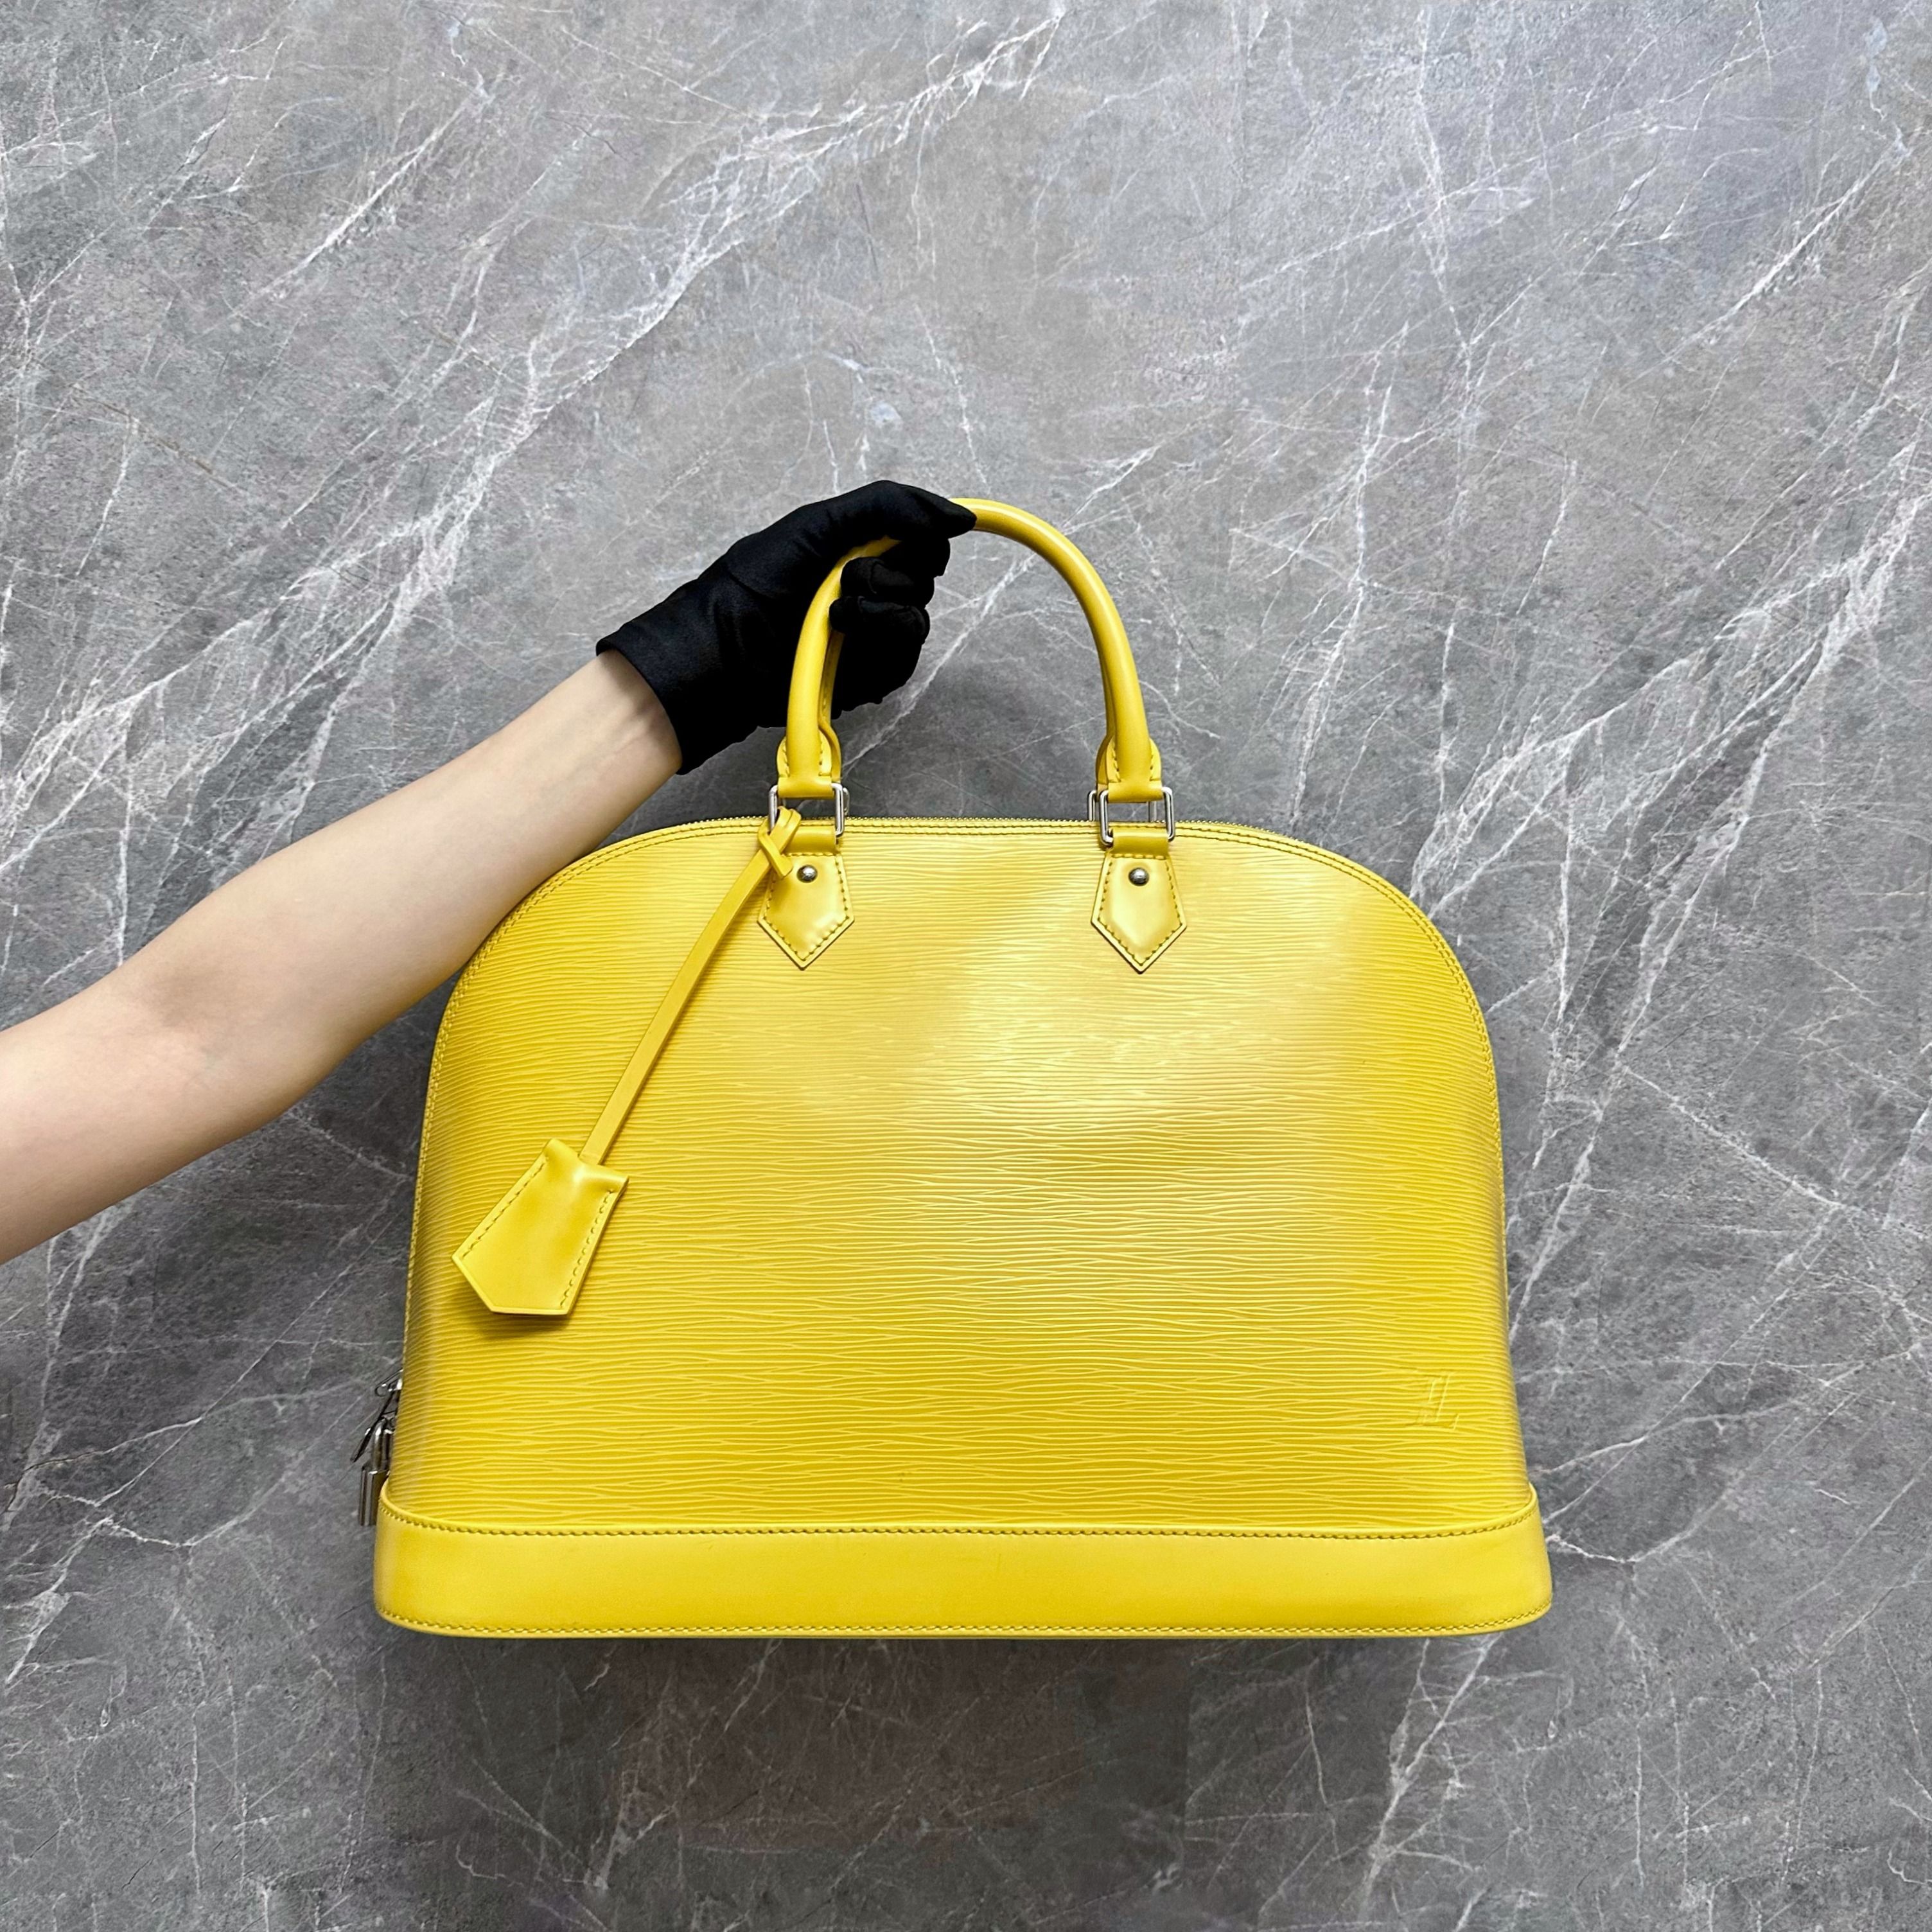 Louis Vuitton Alma PM in Citron Yellow Epi Leather with Shiny Silver  Hardware - SOLD